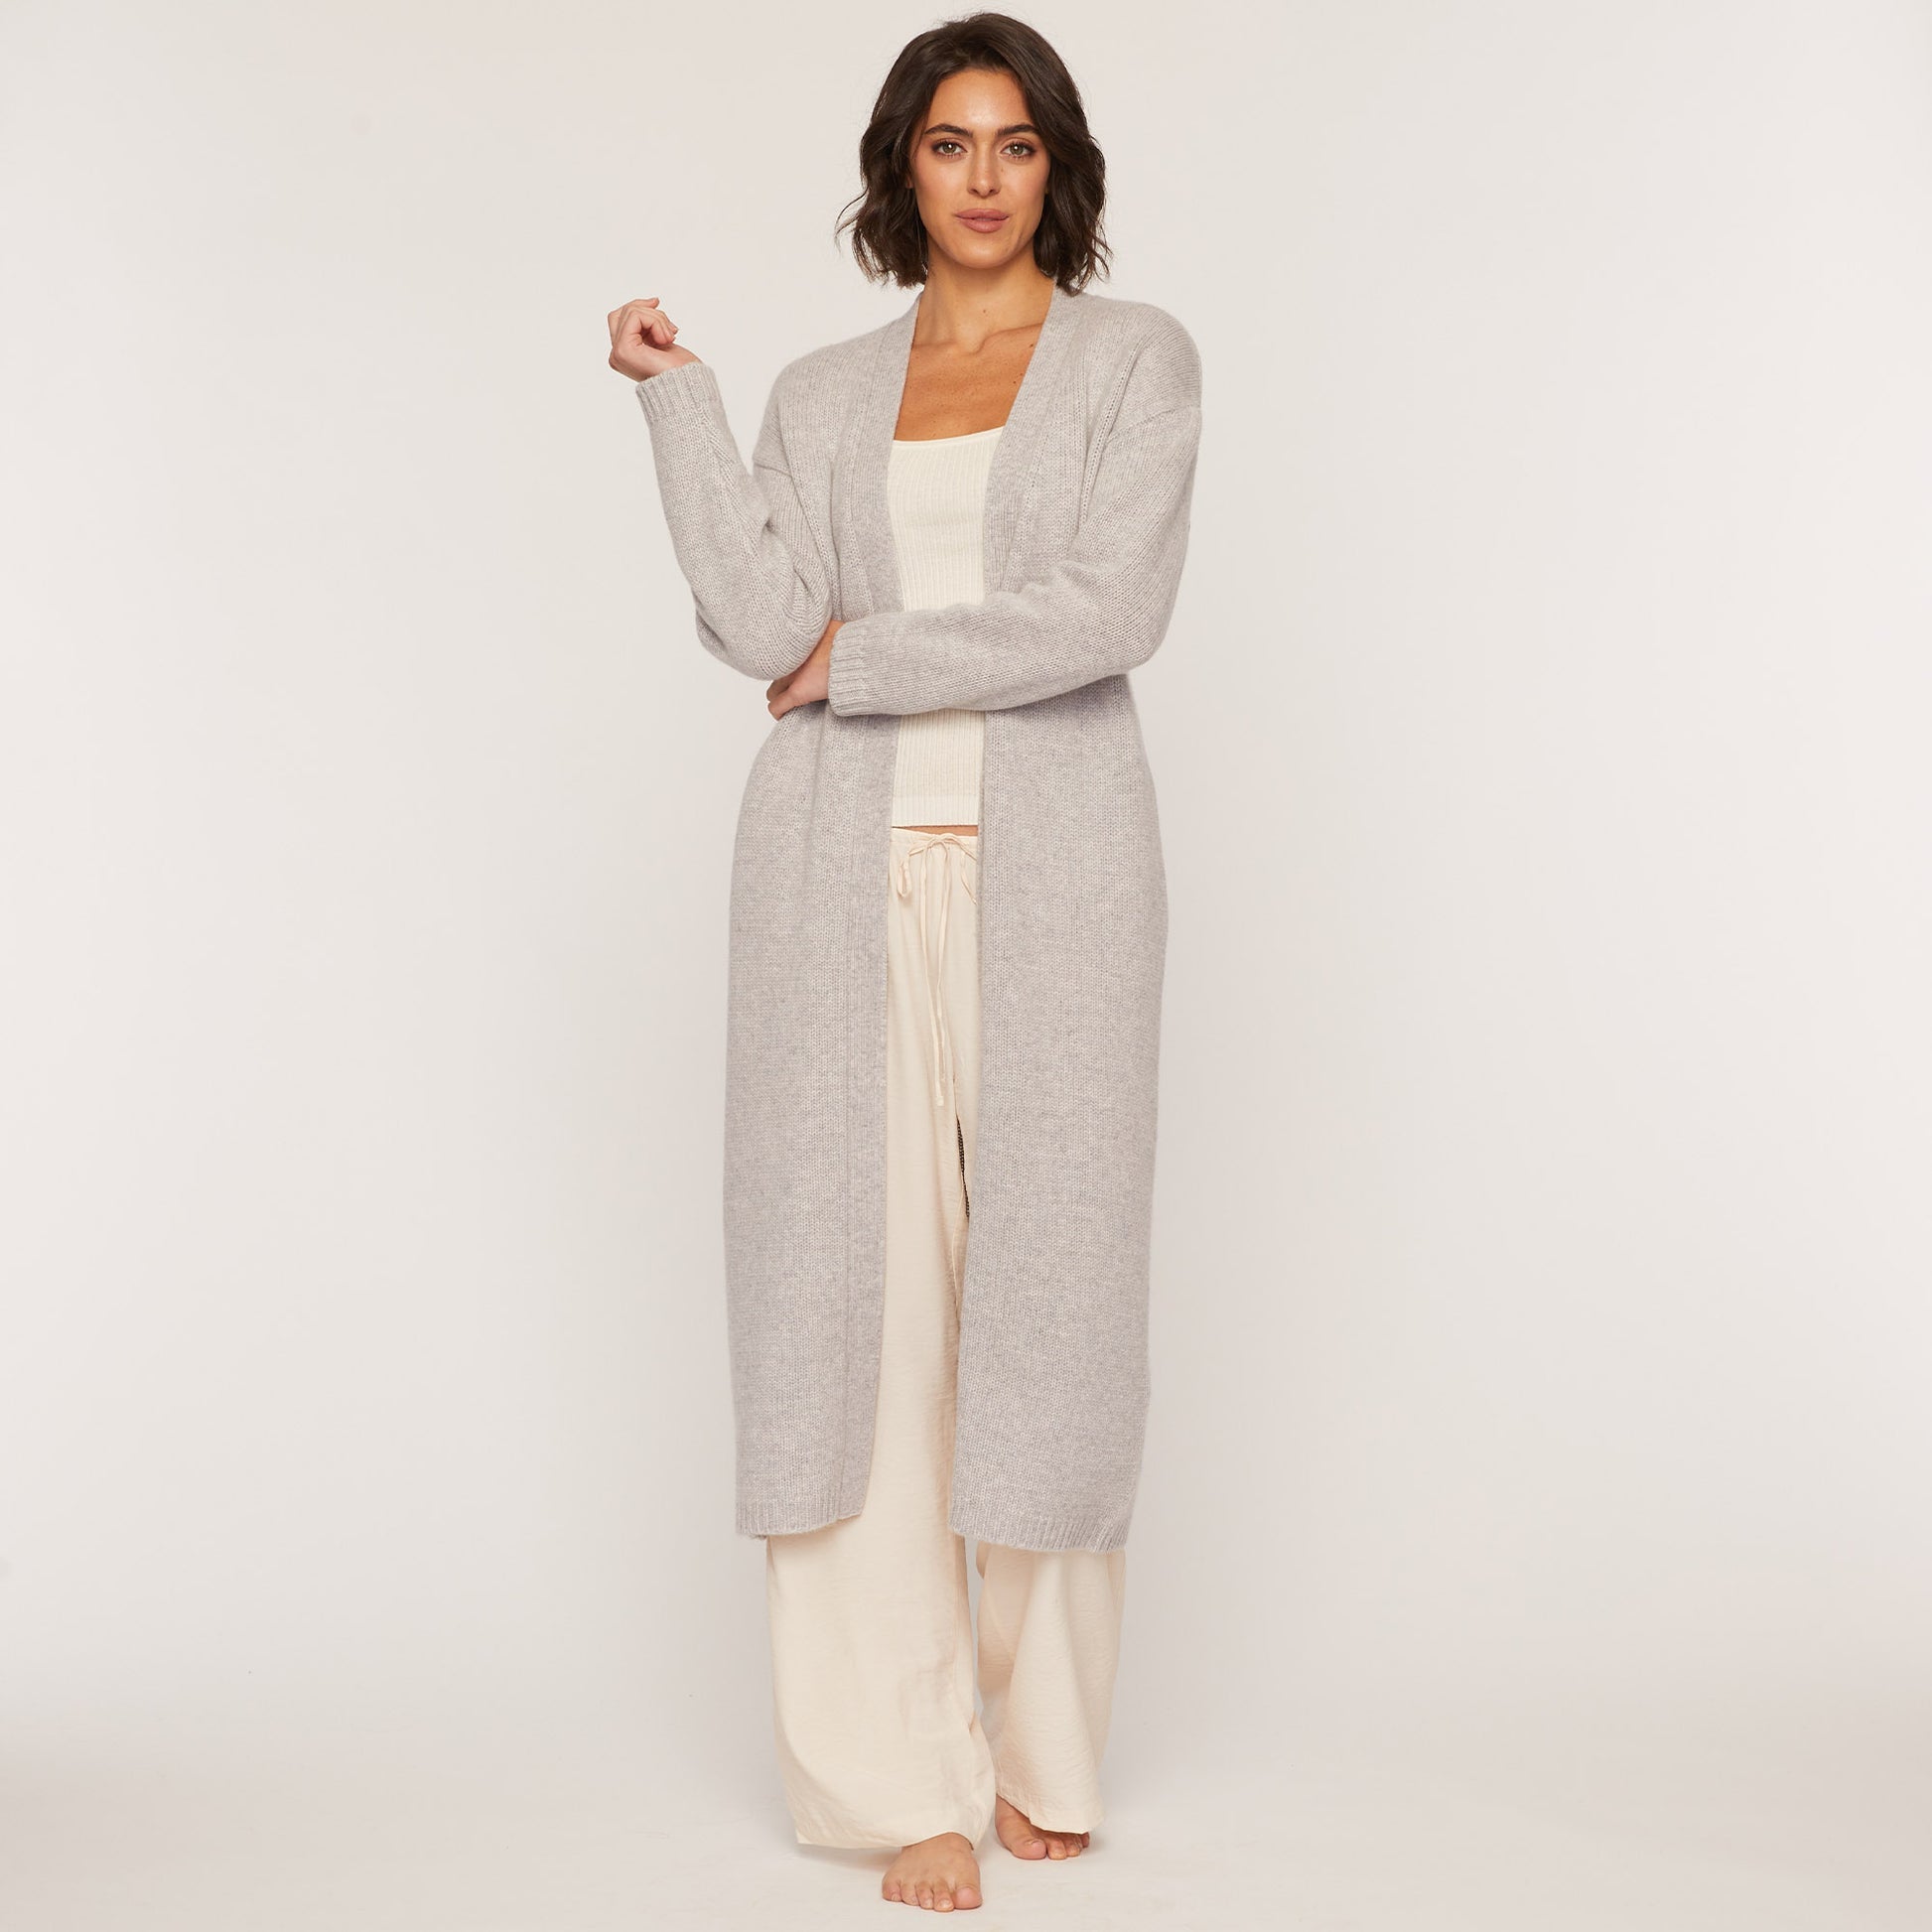 Cashmere Project Luxe Duster